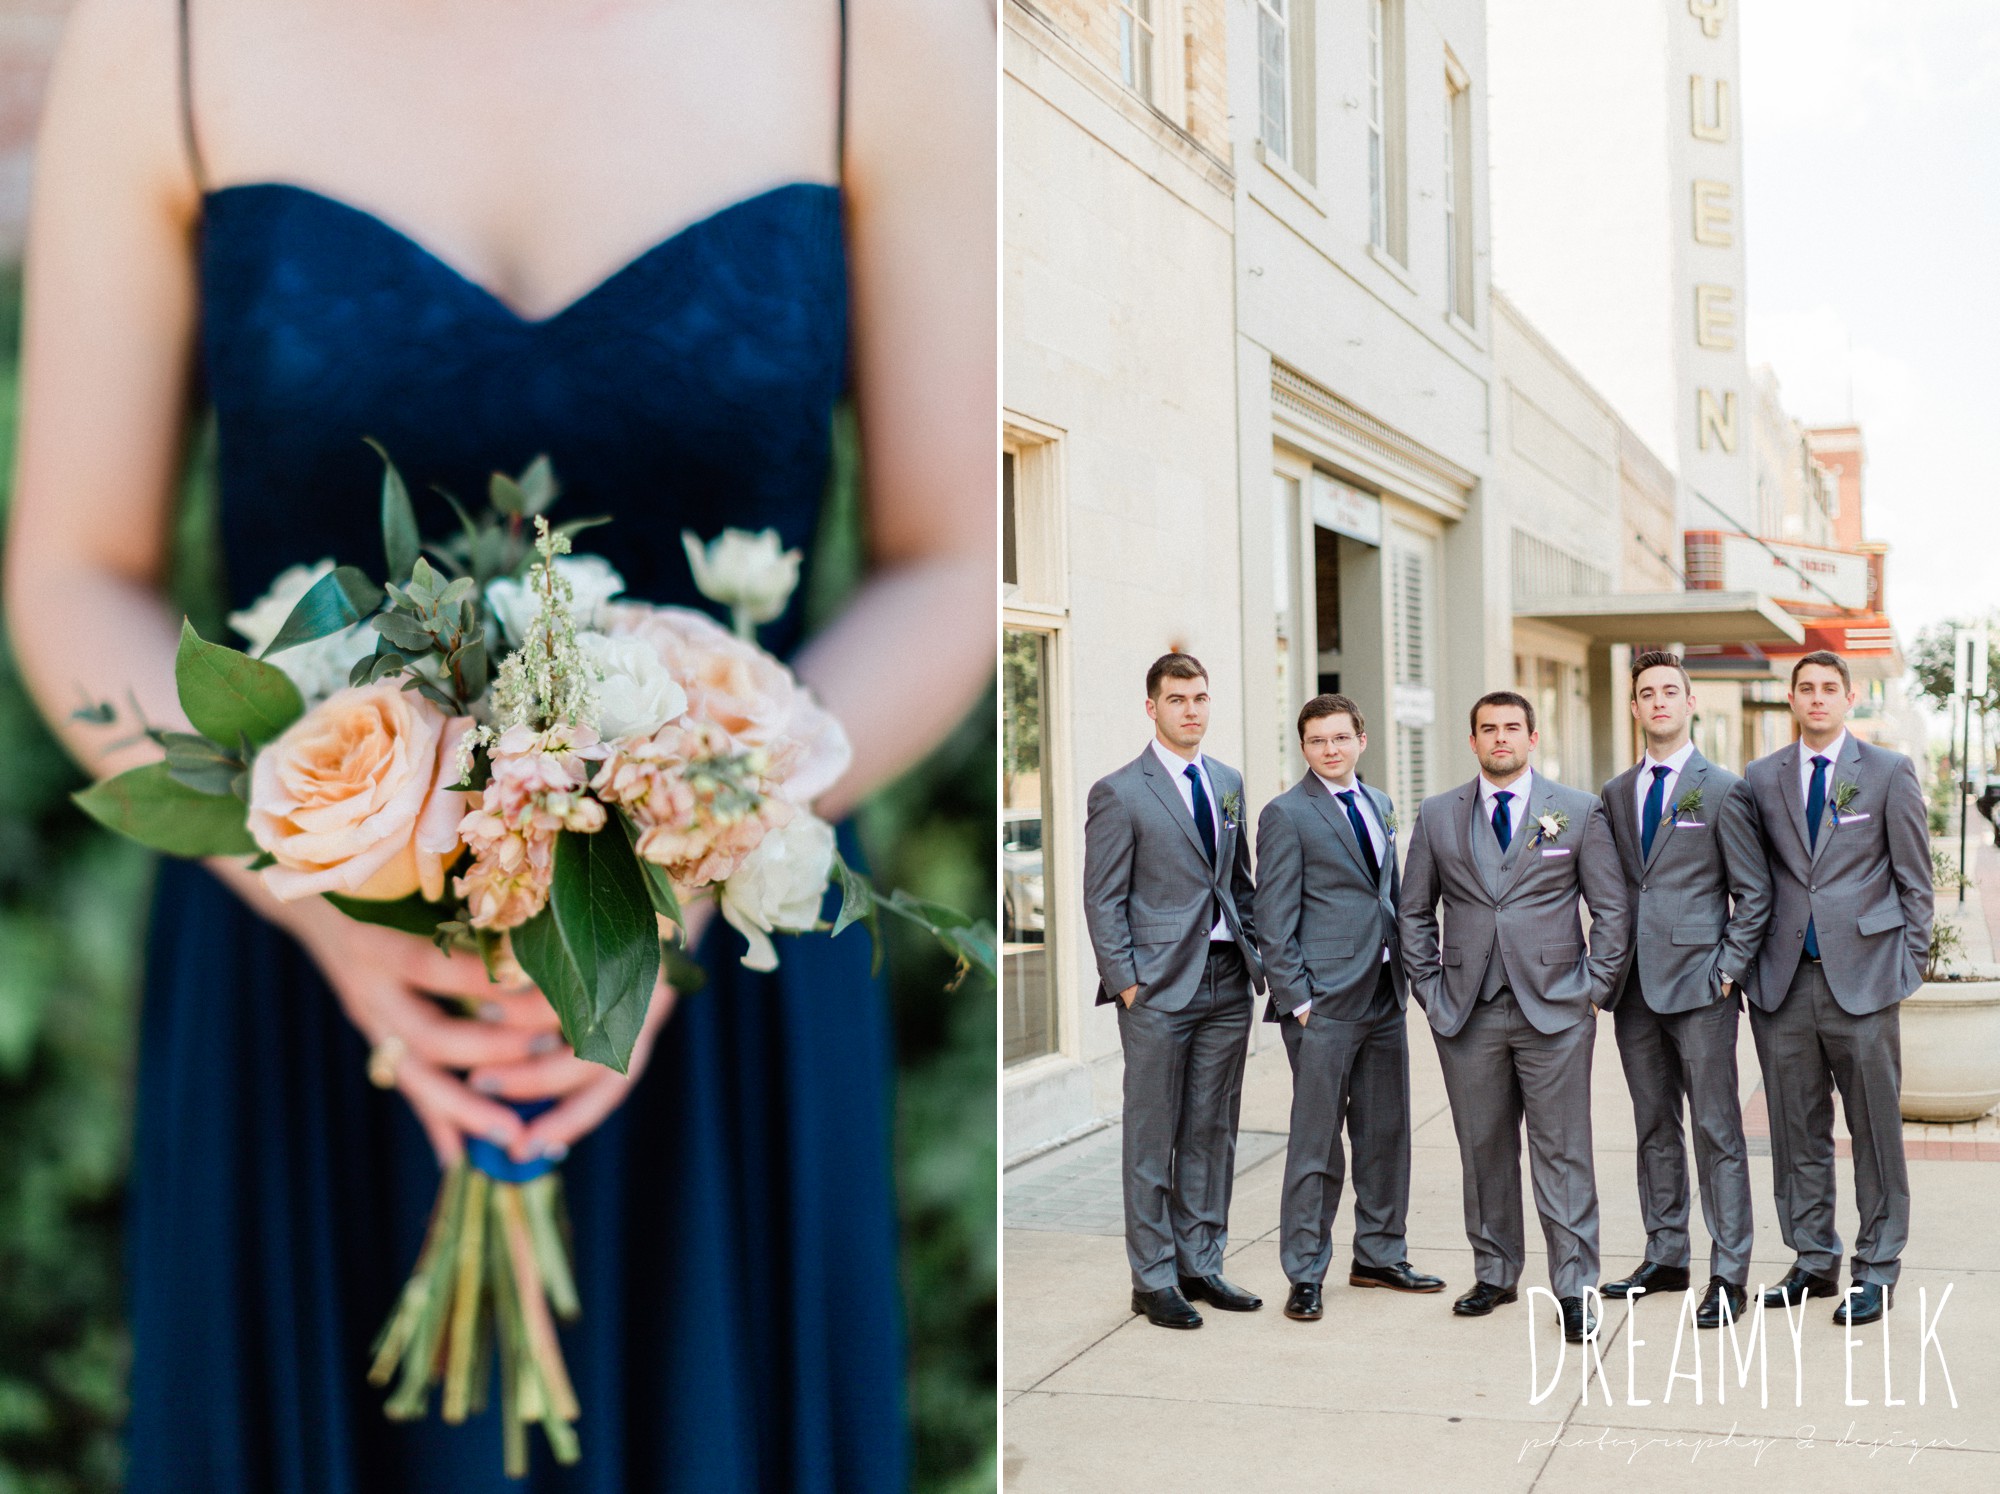 unforgettable floral, groom and groomsmen, gray suit navy tie, spring wedding photo college station texas, dreamy elk photography and design